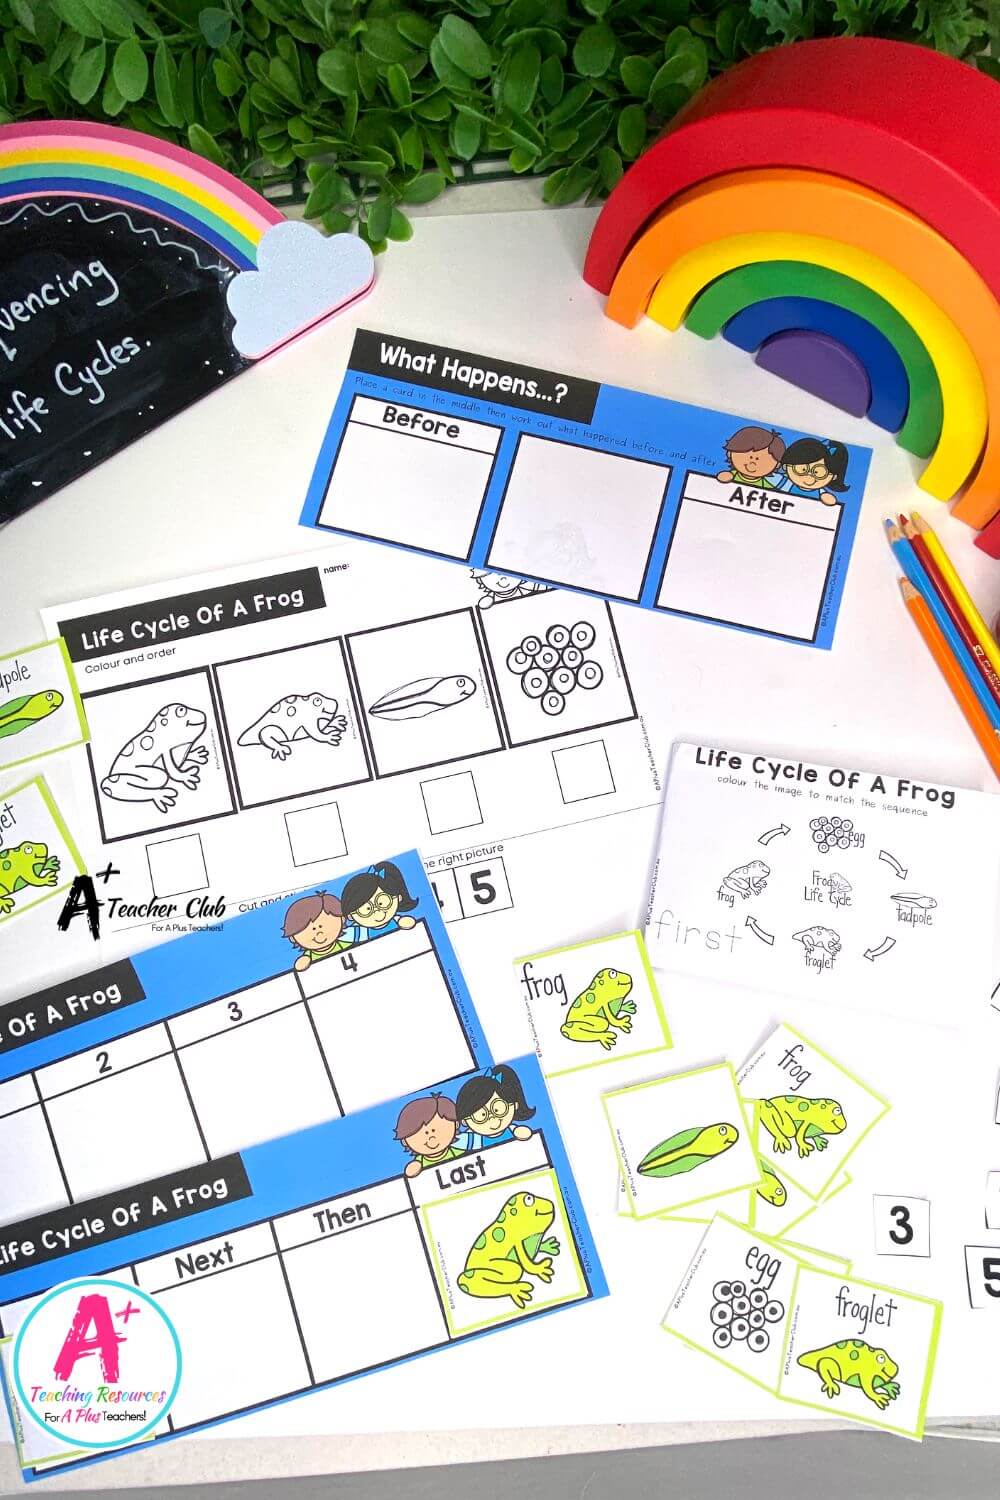 Life Cycle Sequencing 4 Steps - Frog Activities Pack